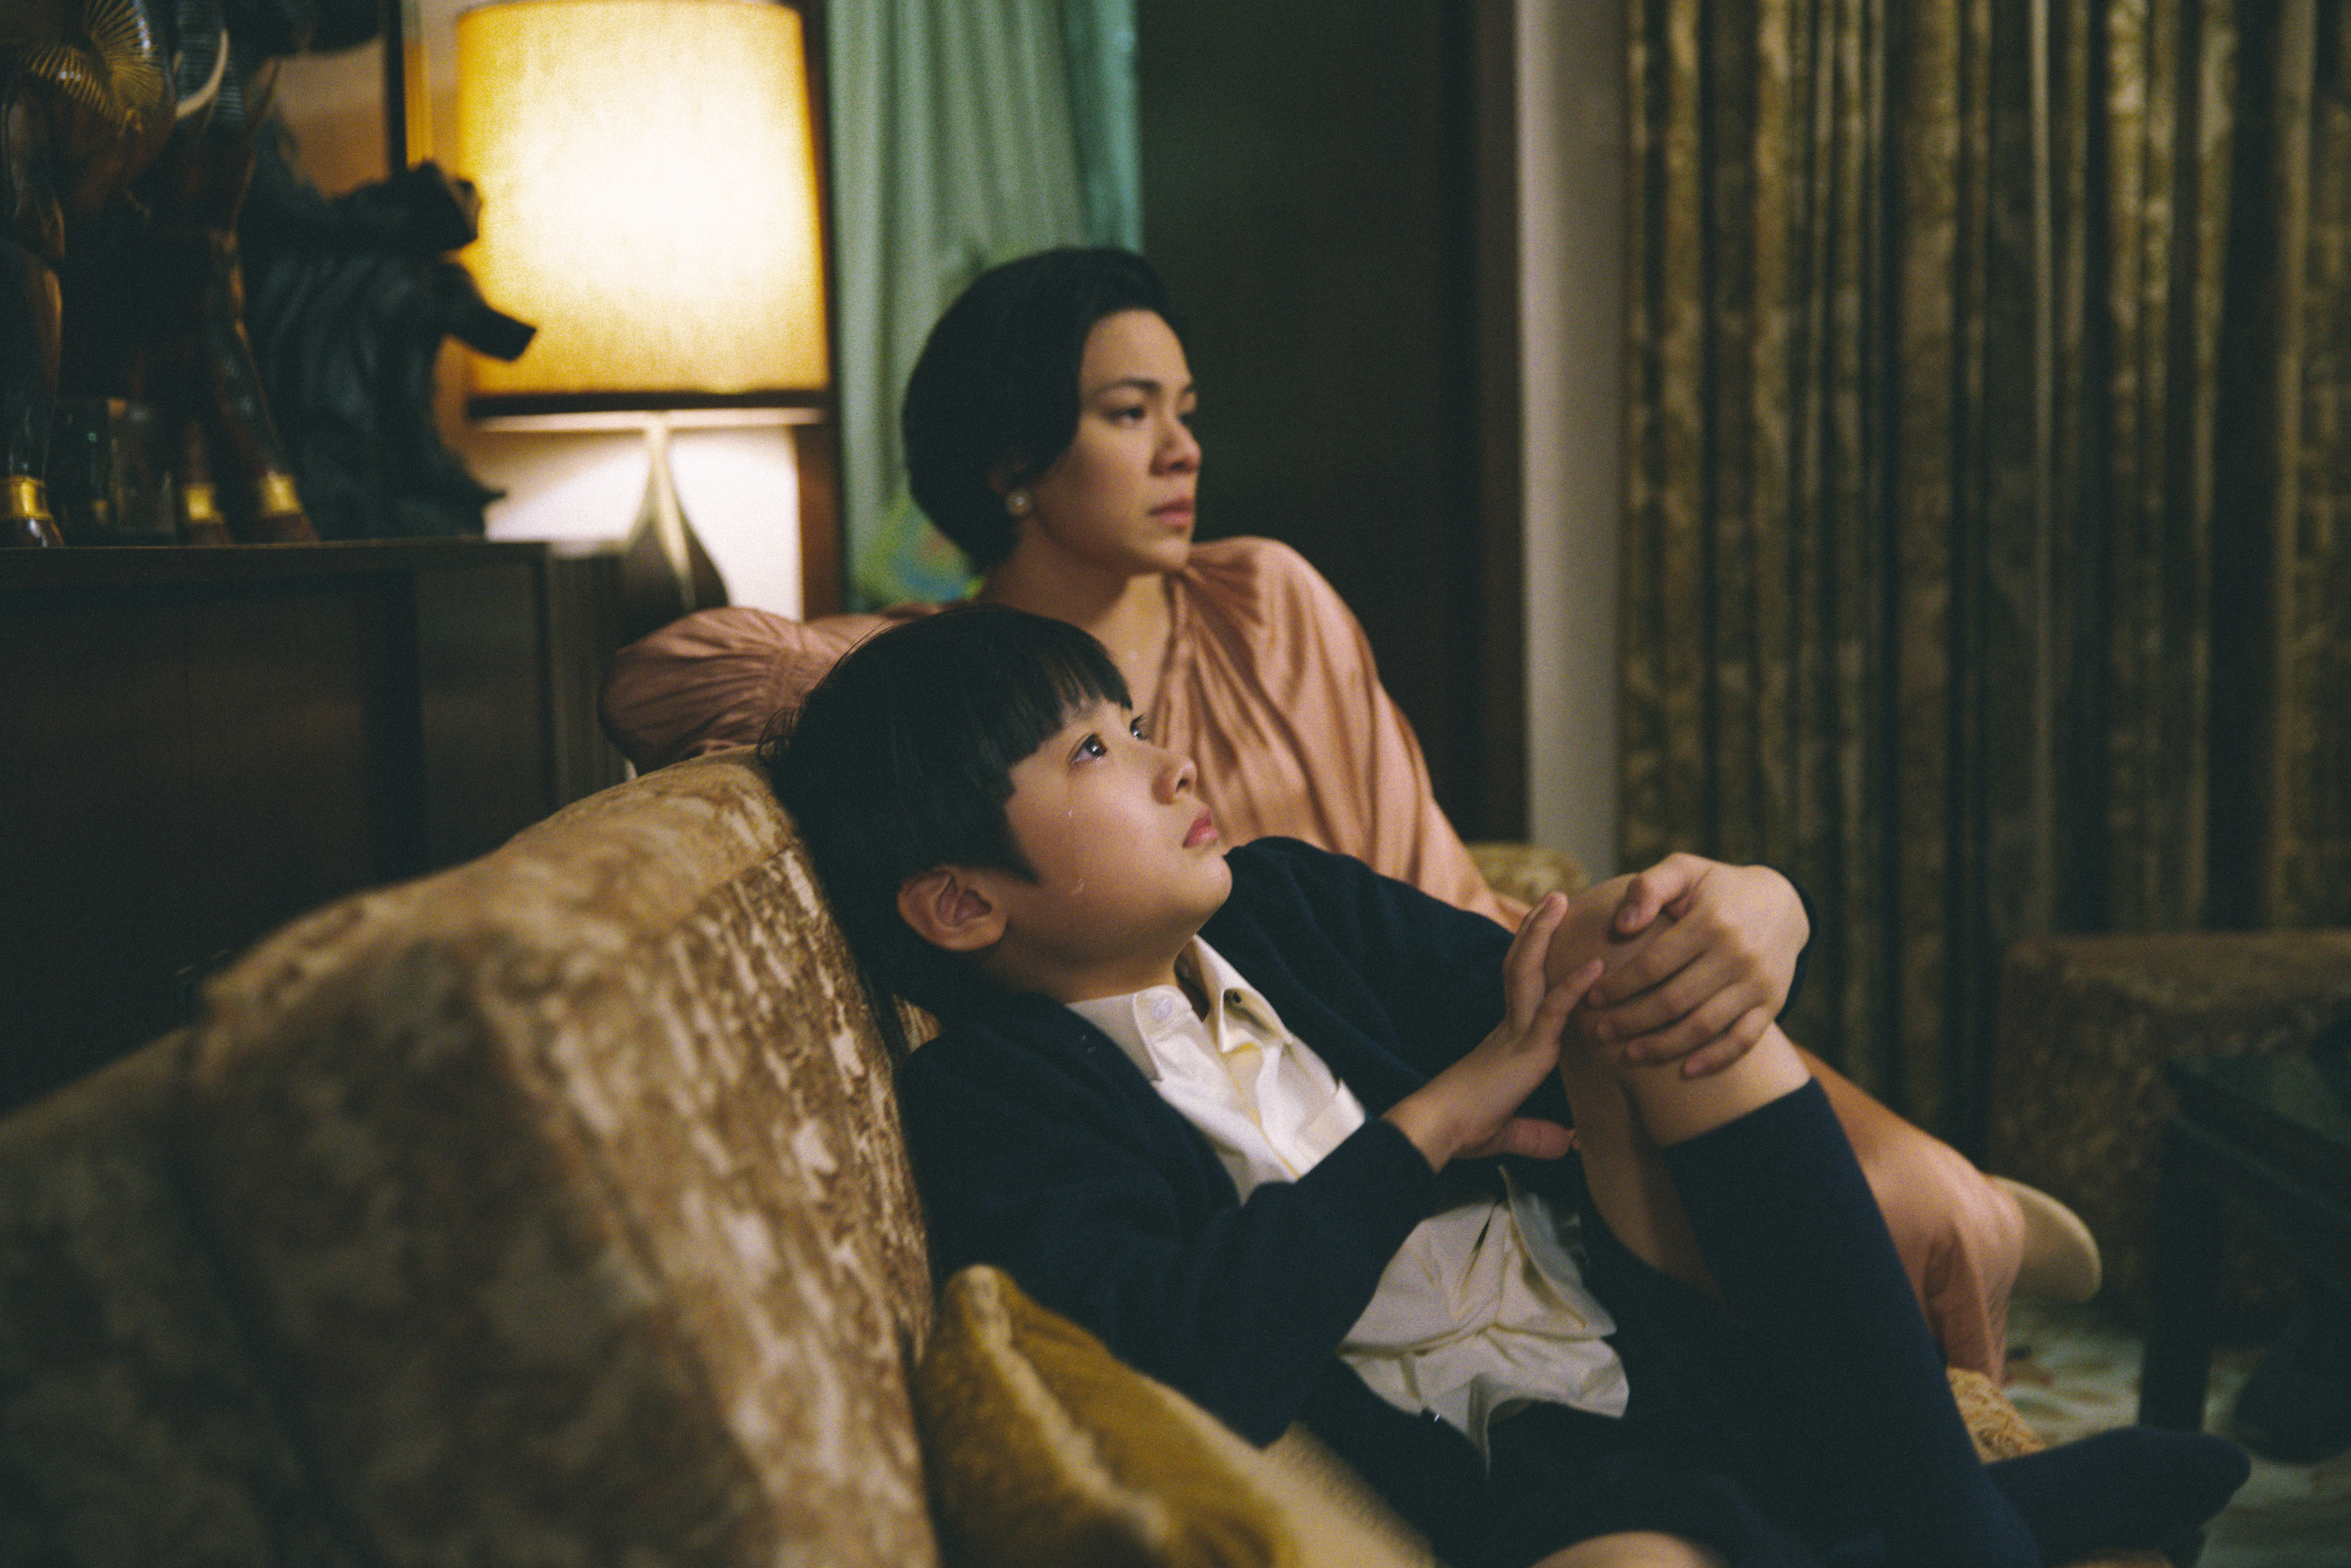 Sean Wong Tsz-lok (front) and Rosa Maria Velasco in a still from “Time Still Turns the Pages”.